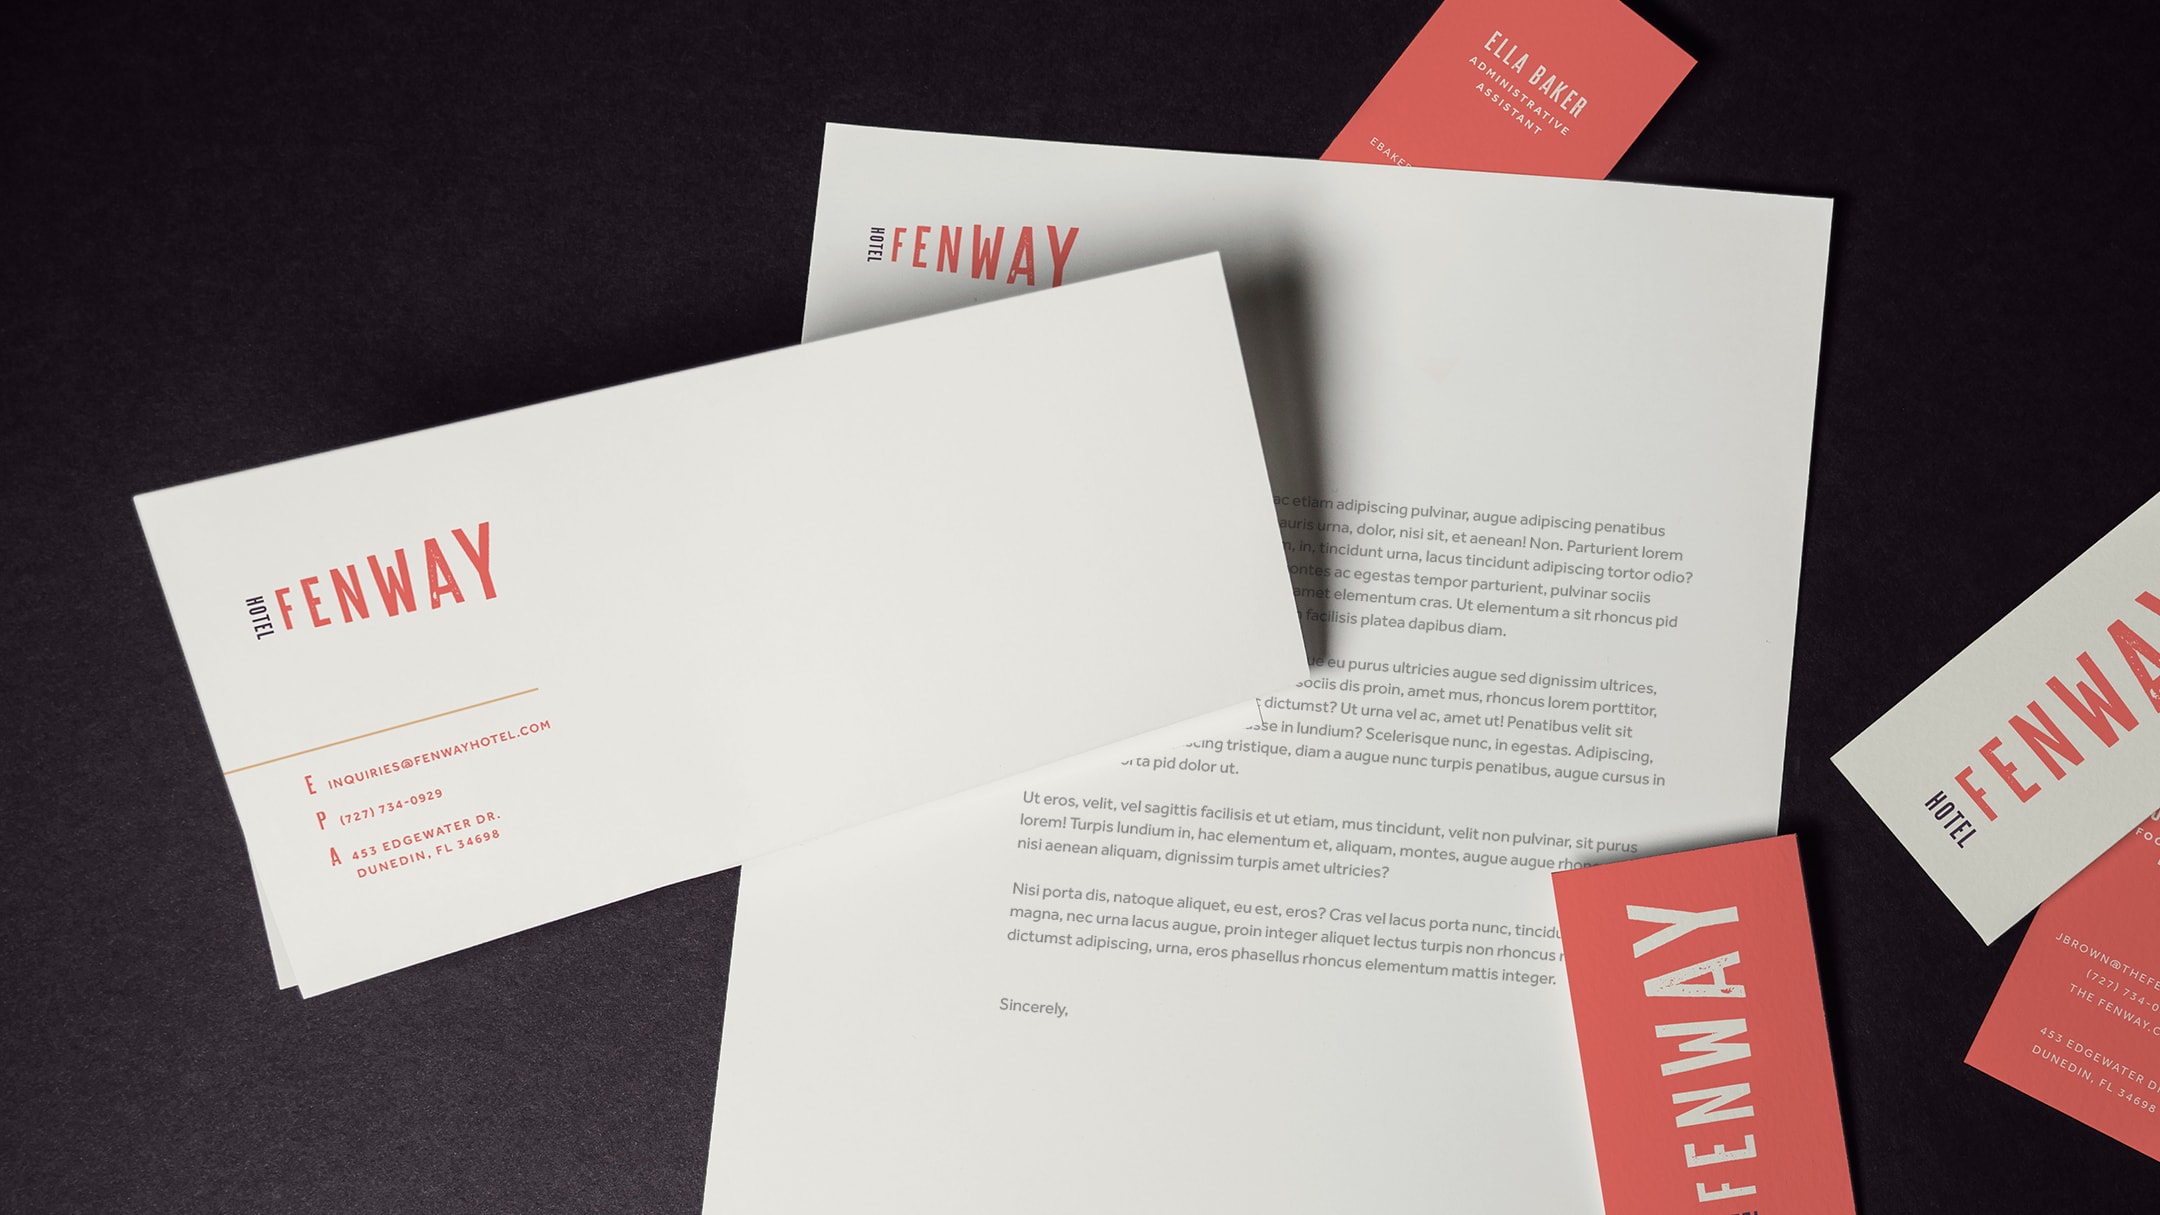 hotel branding elements for Fenway Hotel -hospitality branding project